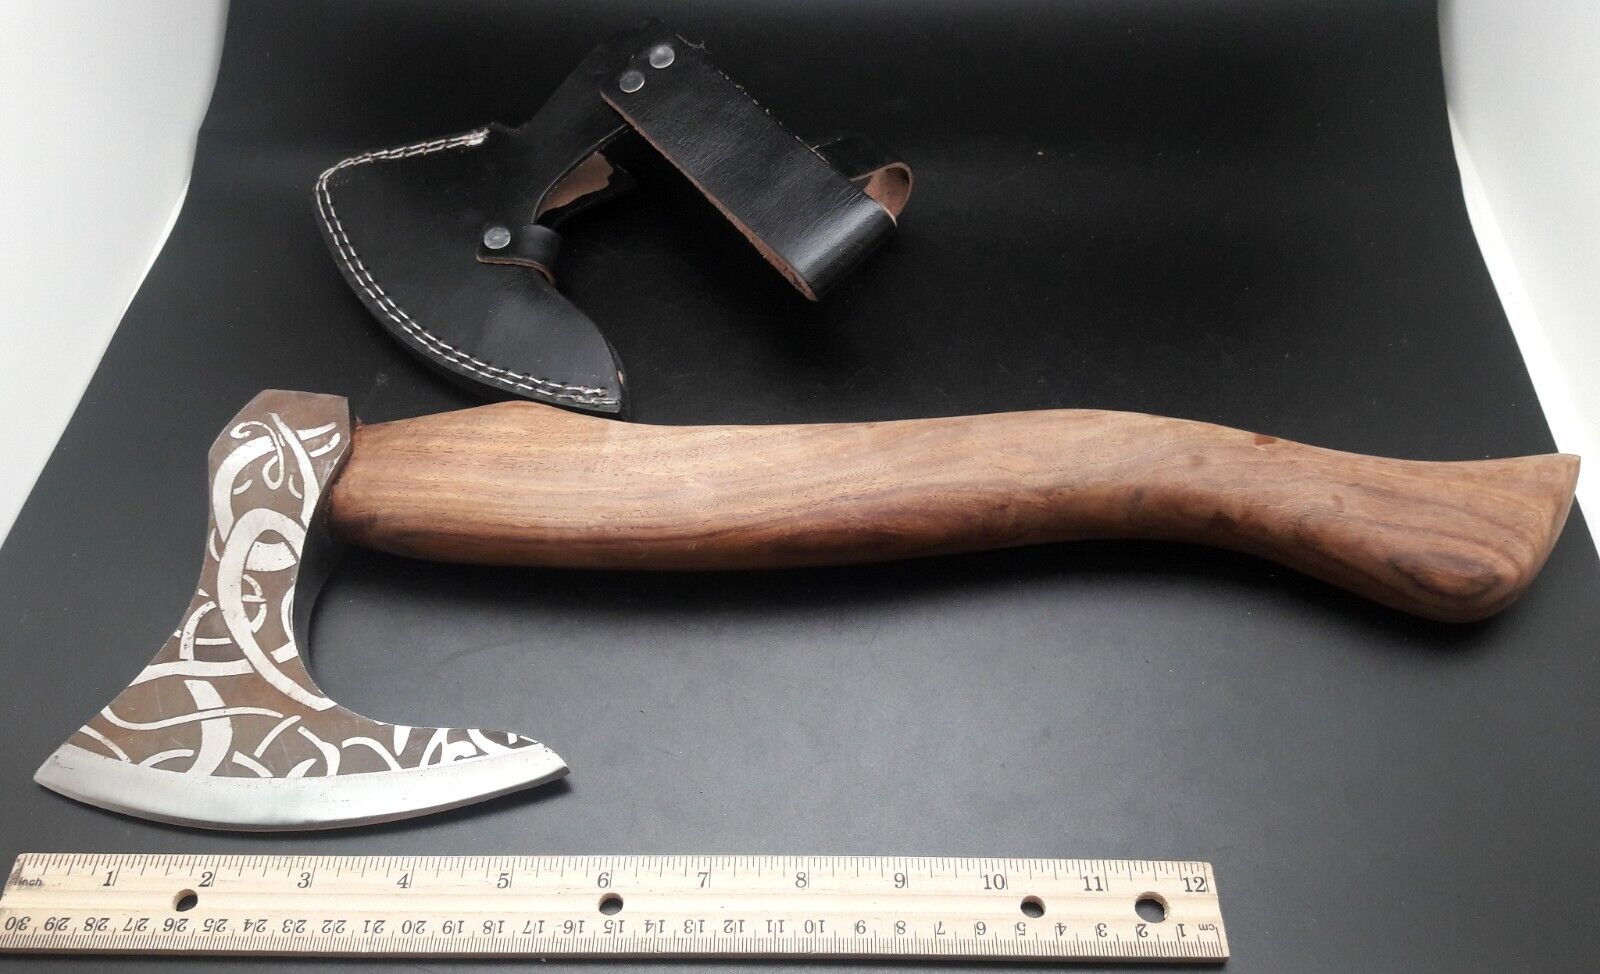 NEW, Rosewood Ragnar Viking Axe Hand Forged Camping Axe